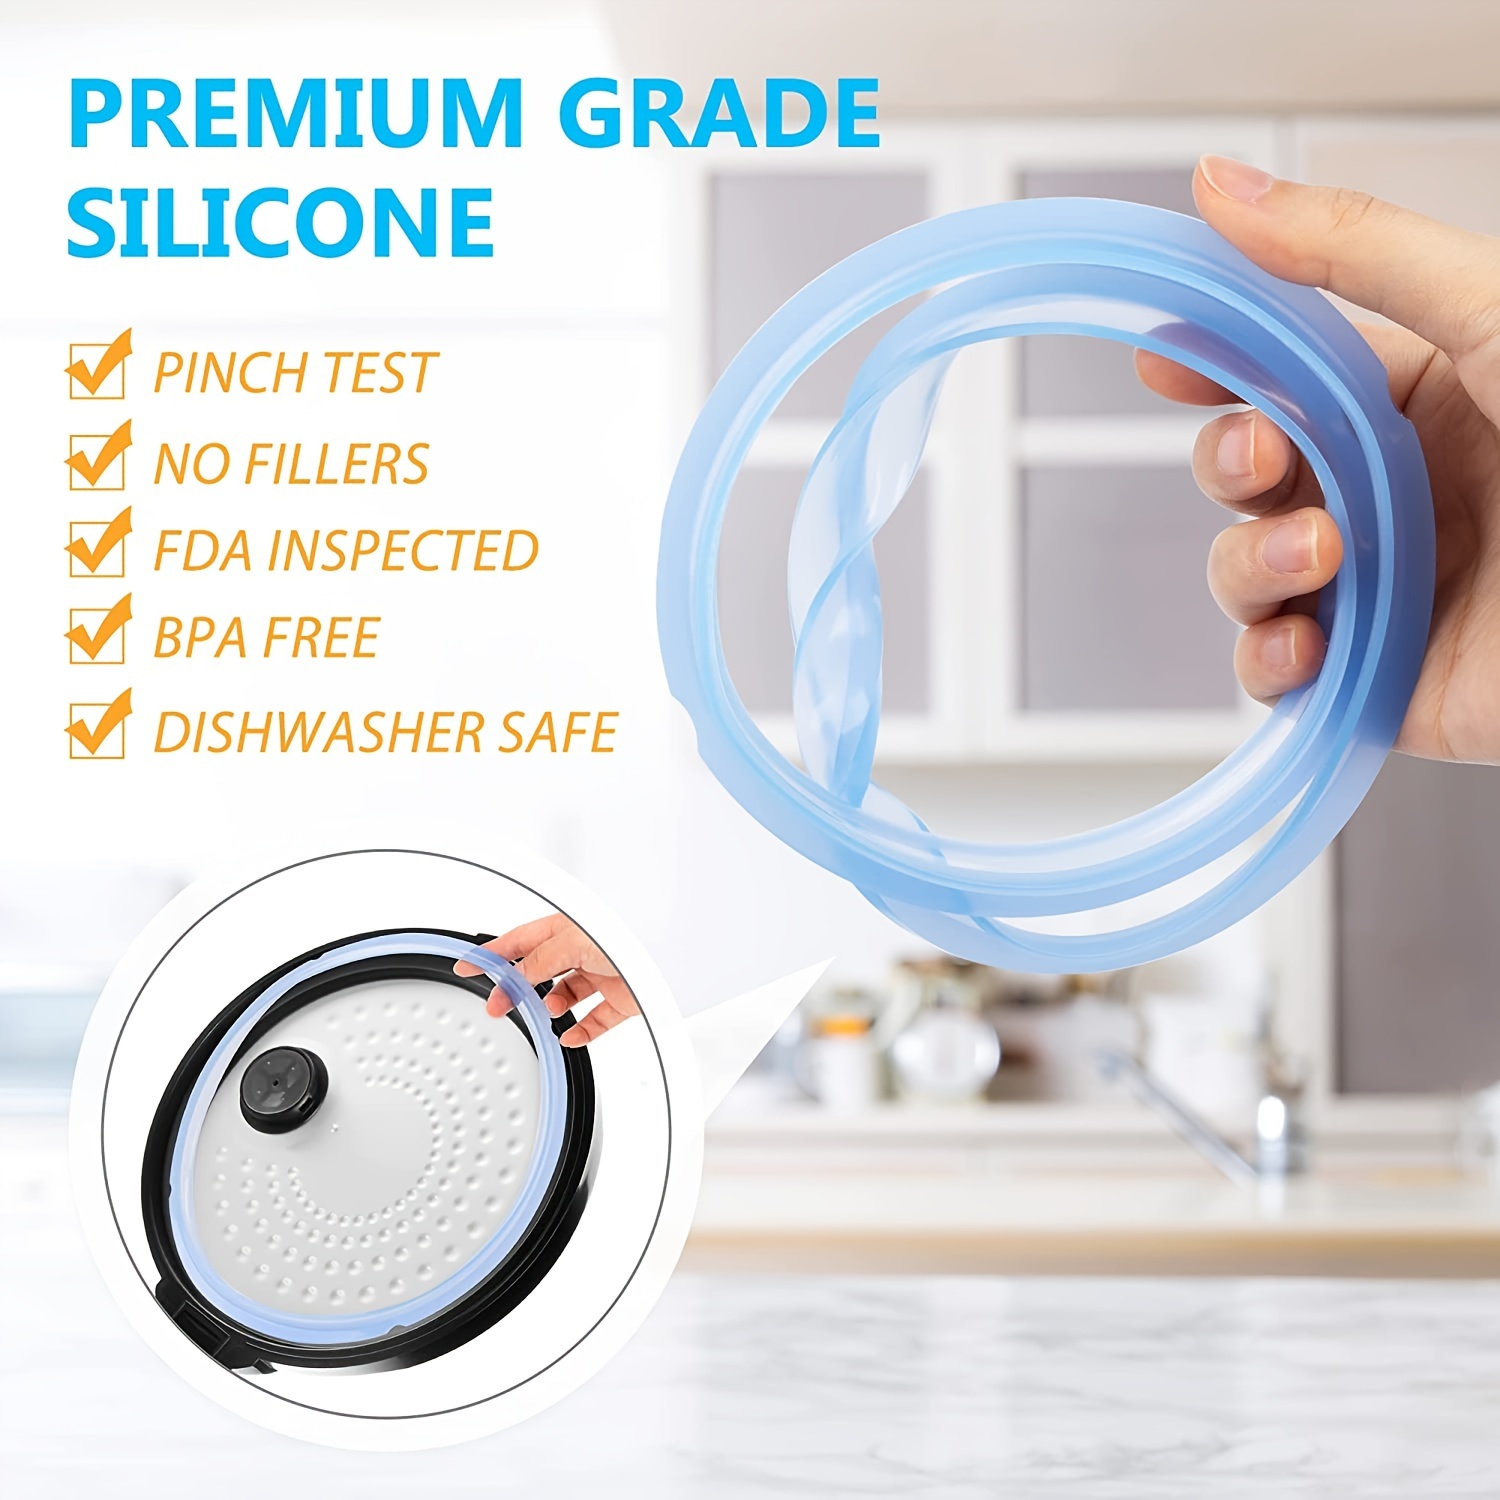 Original Silicone Lid and Silicone Ring for Instant Pot Pressure Cooker, 6 Quart Inner Pot Replacement Cover for IP Duo60, Plus, Max, Lux, Gem & Smart